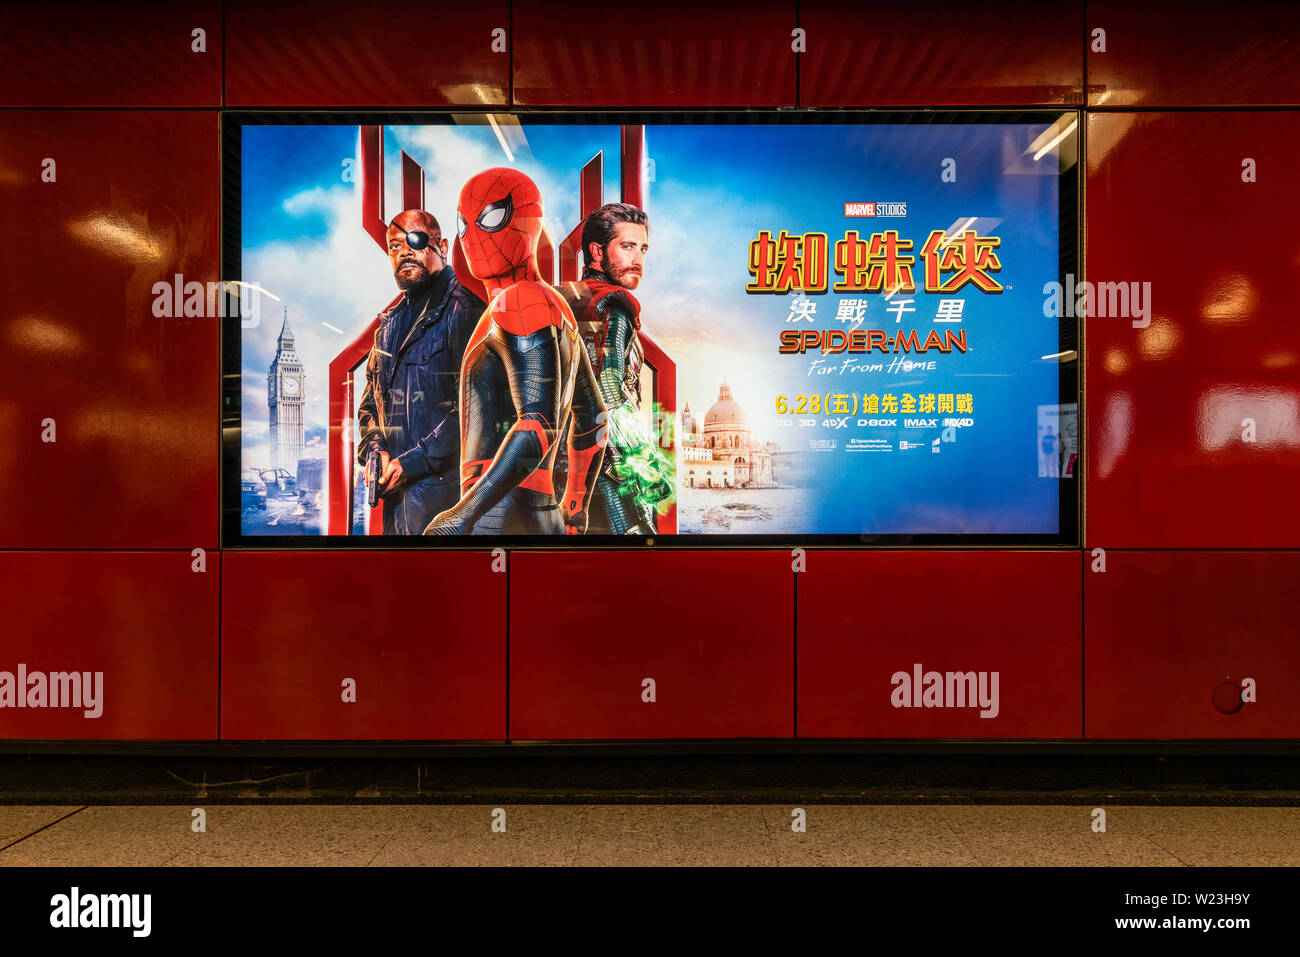 Hong Kong, Hong Kong - Jul 5, 2019: Spider-Man: Far From Home movie poster showing in public subway station. Cinema promotional advertisement, or film Stock Photo